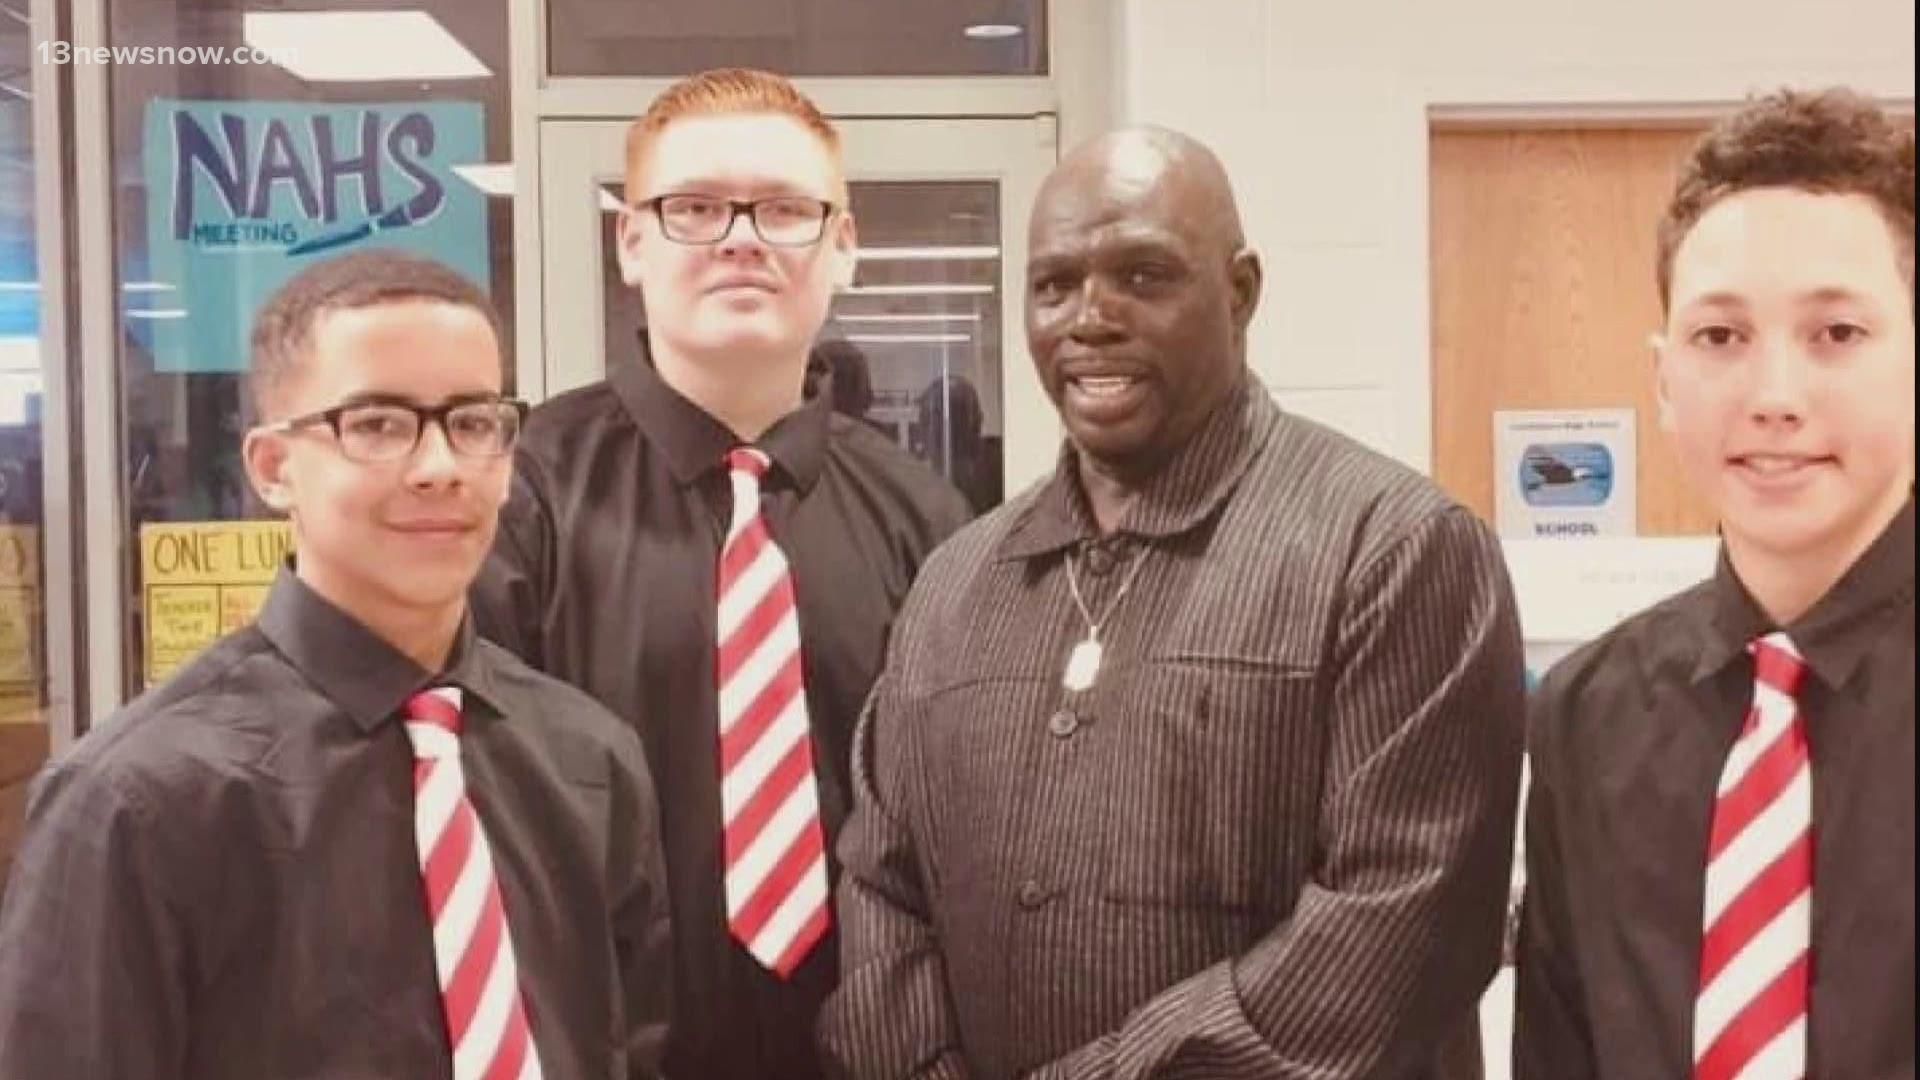 James Risper overcame devastation and adversity to touch the lives of young people in his community.   He launched the nonprofit ‘Am I My Brother’s Keeper?’